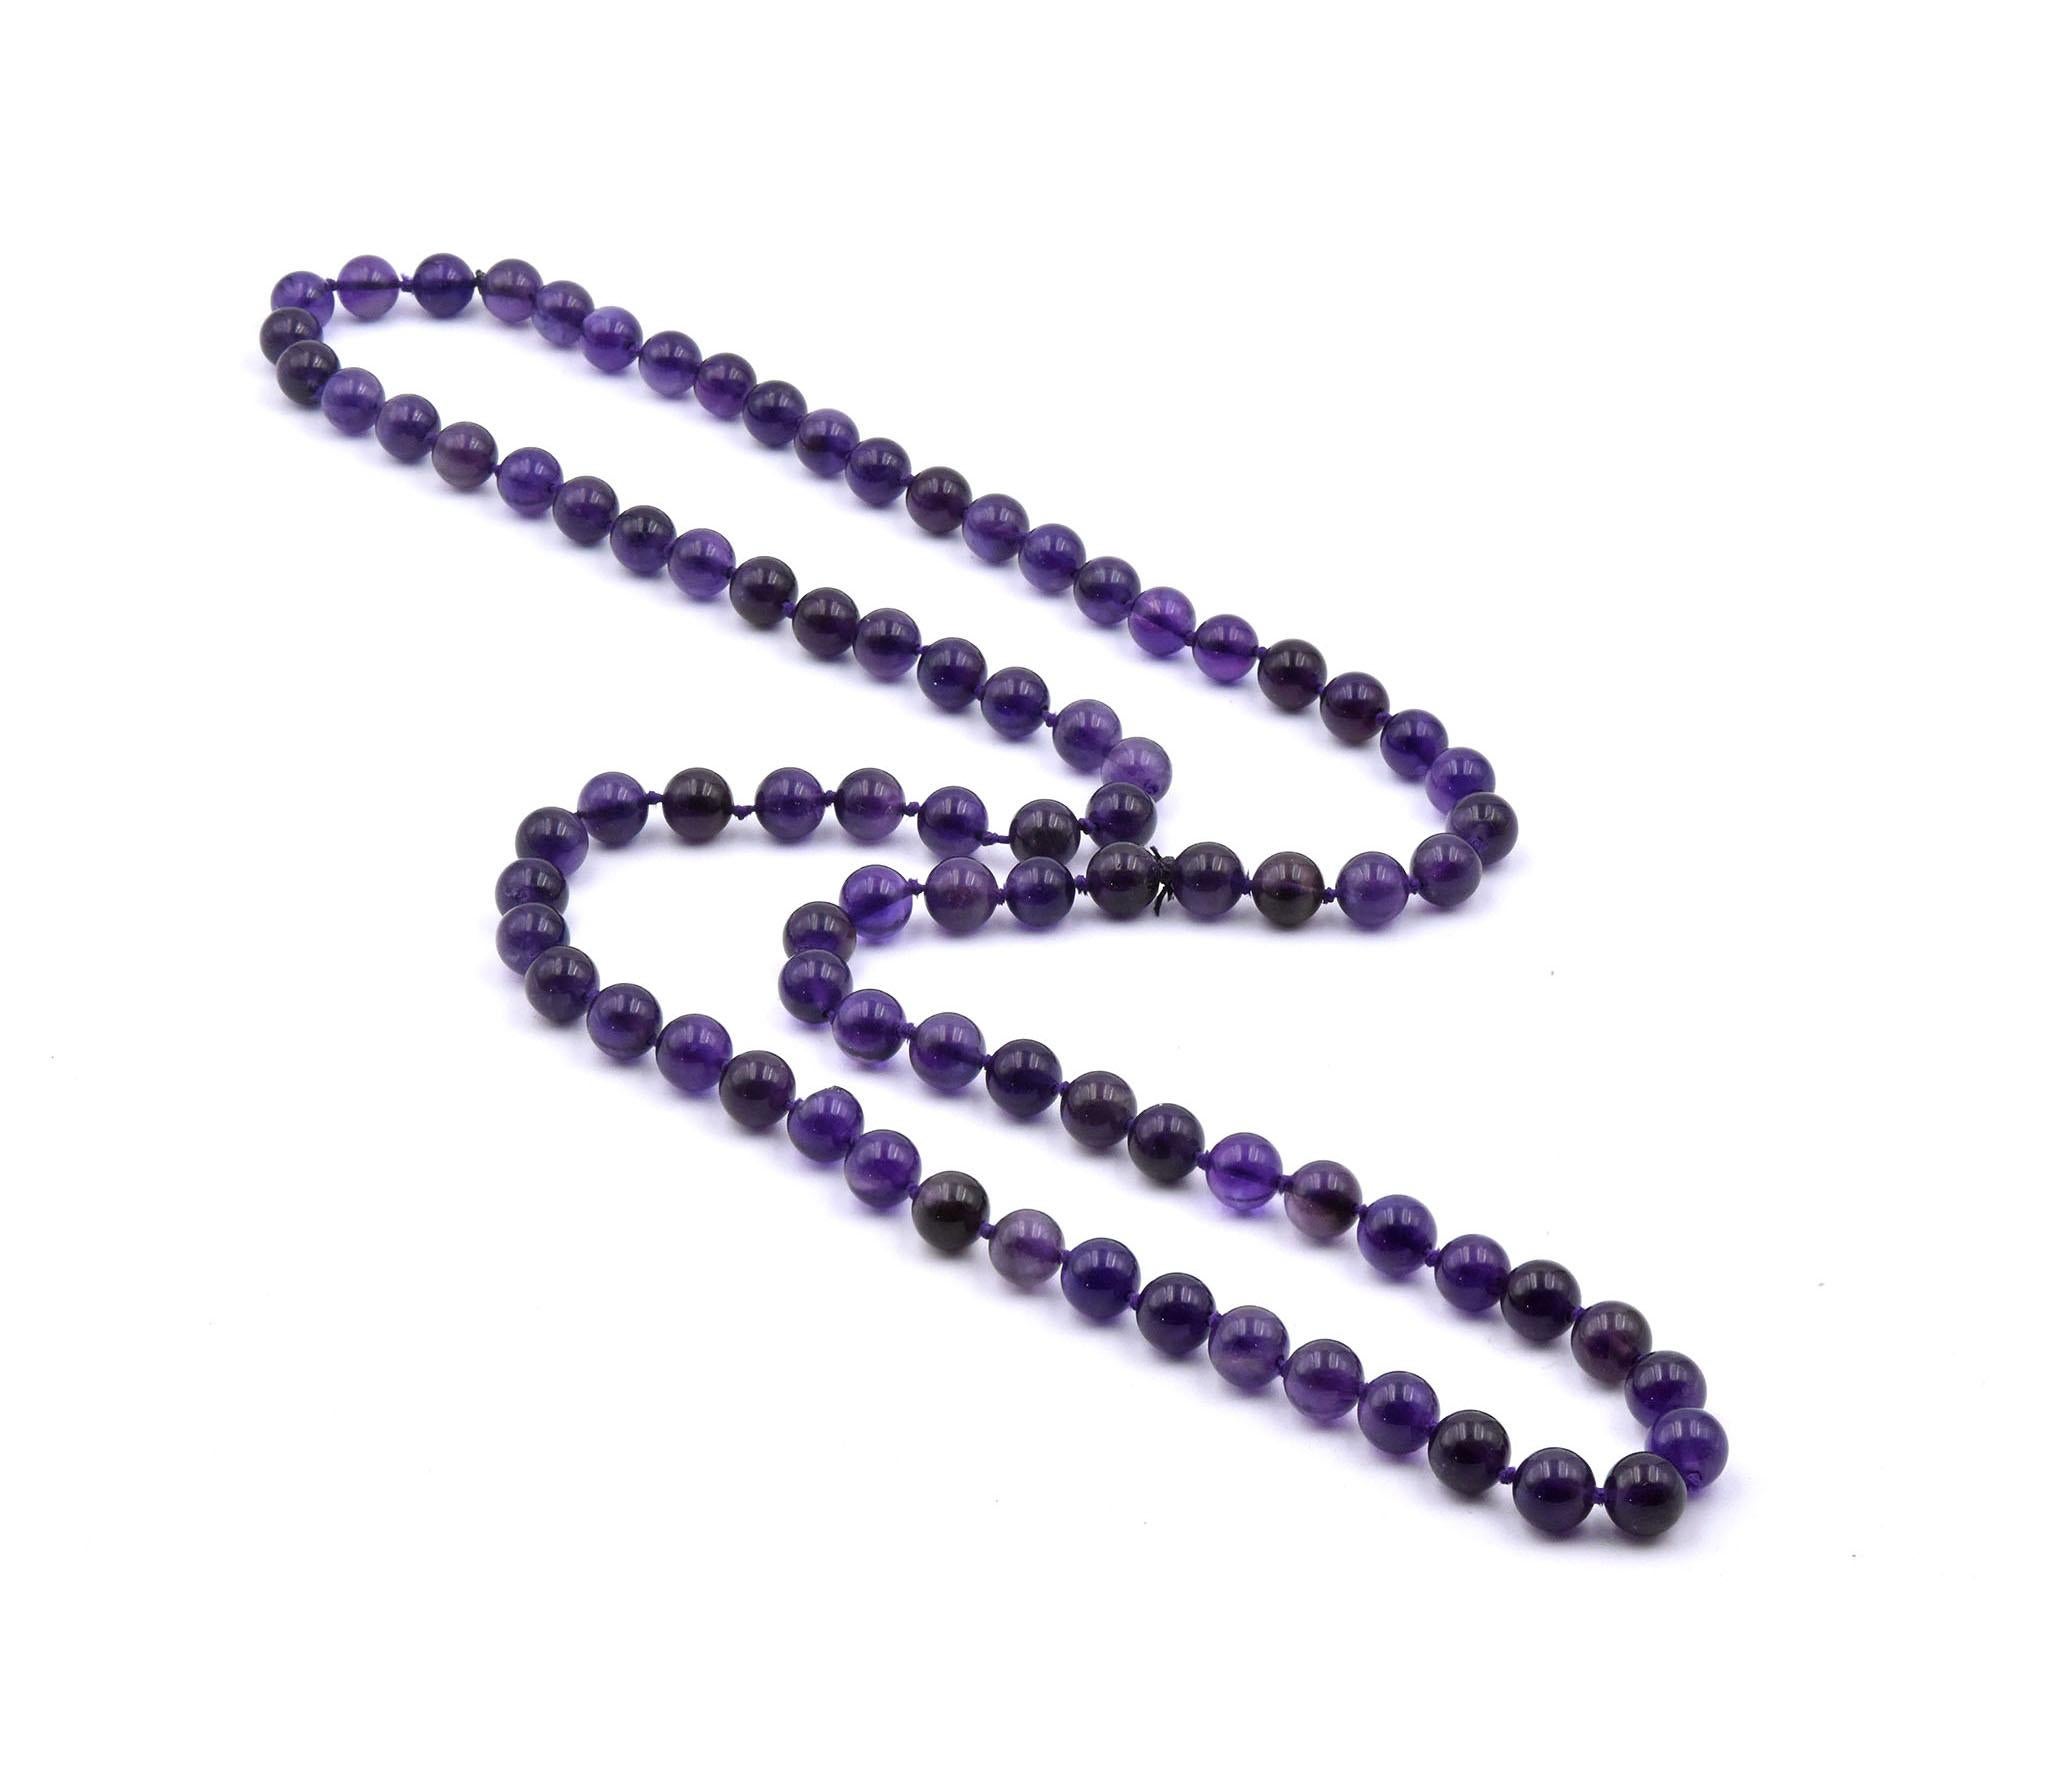 Material: amethyst
Dimensions: necklace measures 32-inches
Weight: 60.78 grams
